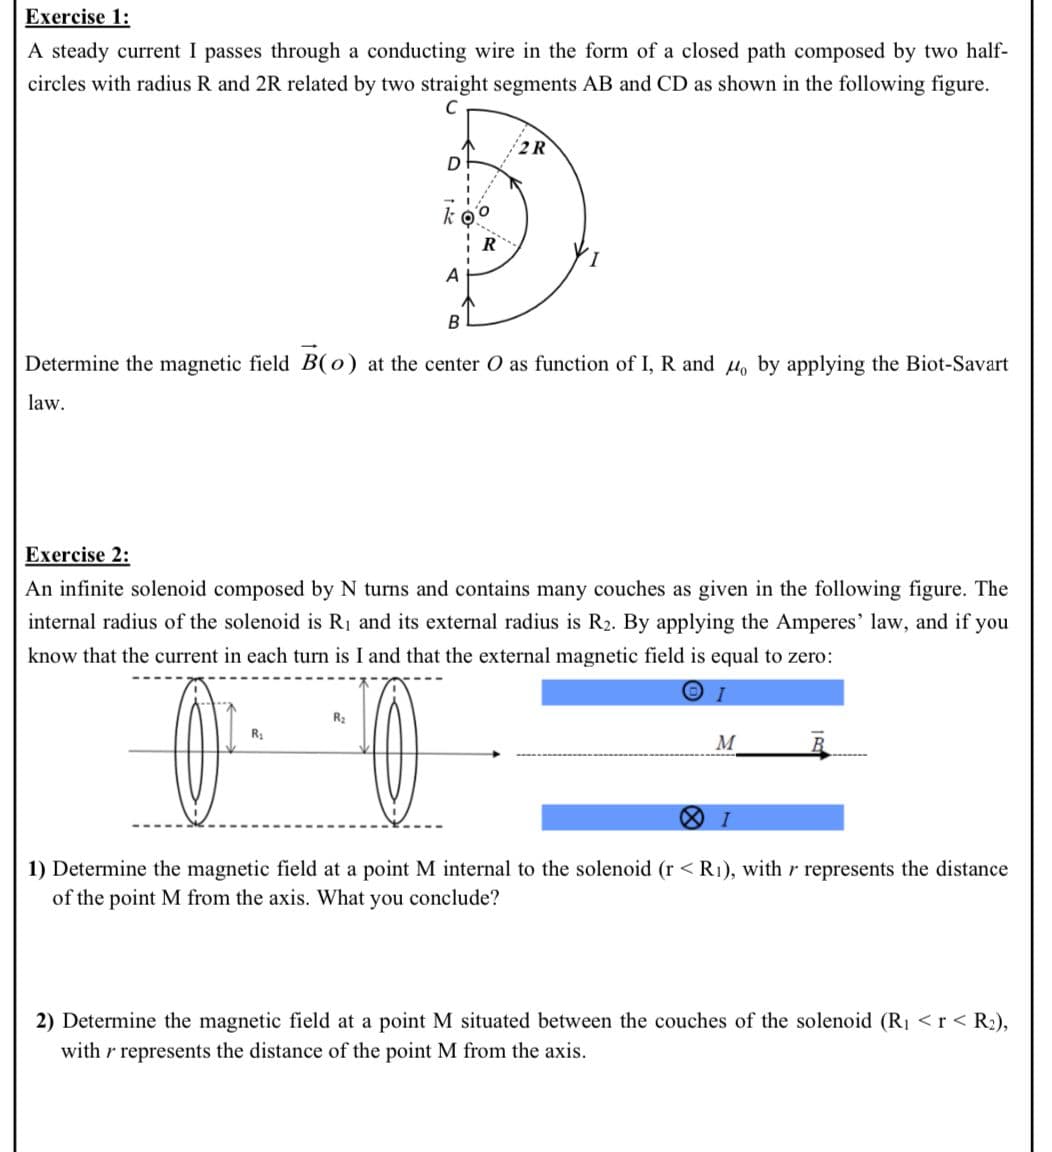 Exercise 1:
A steady current I passes through a conducting wire in the form of a closed path composed by two half-
circles with radius R and 2R related by two straight segments AB and CD as shown in the following figure.
2R
R
A
B
Determine the magnetic field B(0) at the center O as function of I, R and Ho by applying the Biot-Savart
law.
Exercise 2:
An infinite solenoid composed by N turns and contains many couches as given in the following figure. The
internal radius of the solenoid is R1 and its external radius is R2. By applying the Amperes' law, and if you
know that the current in each turn is I and that the external magnetic field is equal to zero:
R2
M
1) Determine the magnetic field at a point M internal to the solenoid (r < R1), with r represents the distance
of the point M from the axis. What you conclude?
2) Determine the magnetic field at a point M situated between the couches of the solenoid (R1 <r< R2),
with r represents the distance of the point M from the axis.
